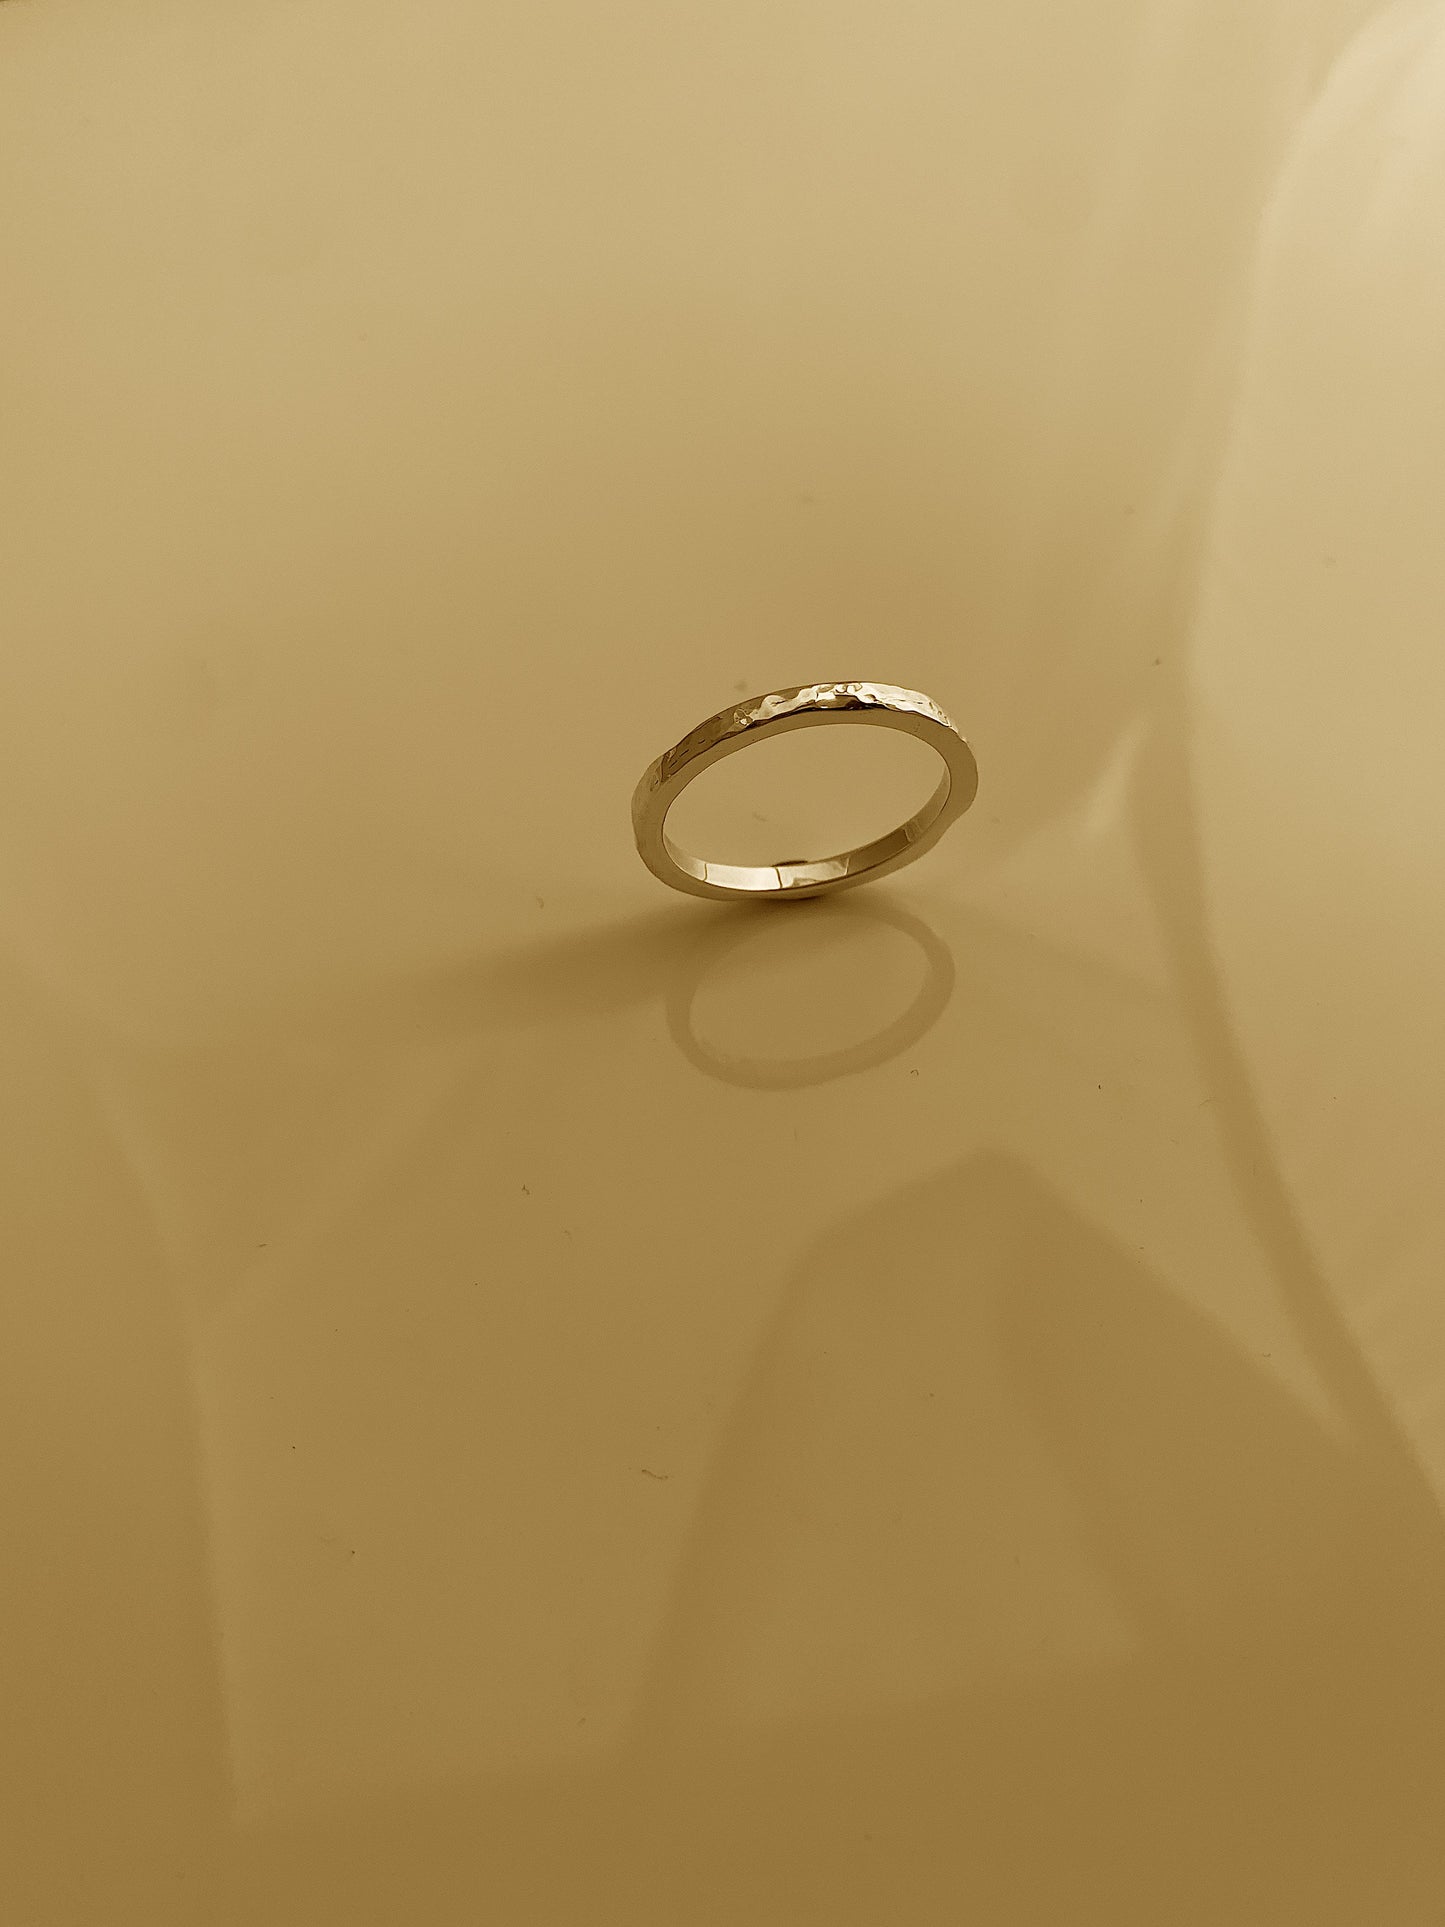 The "Formless' Ring